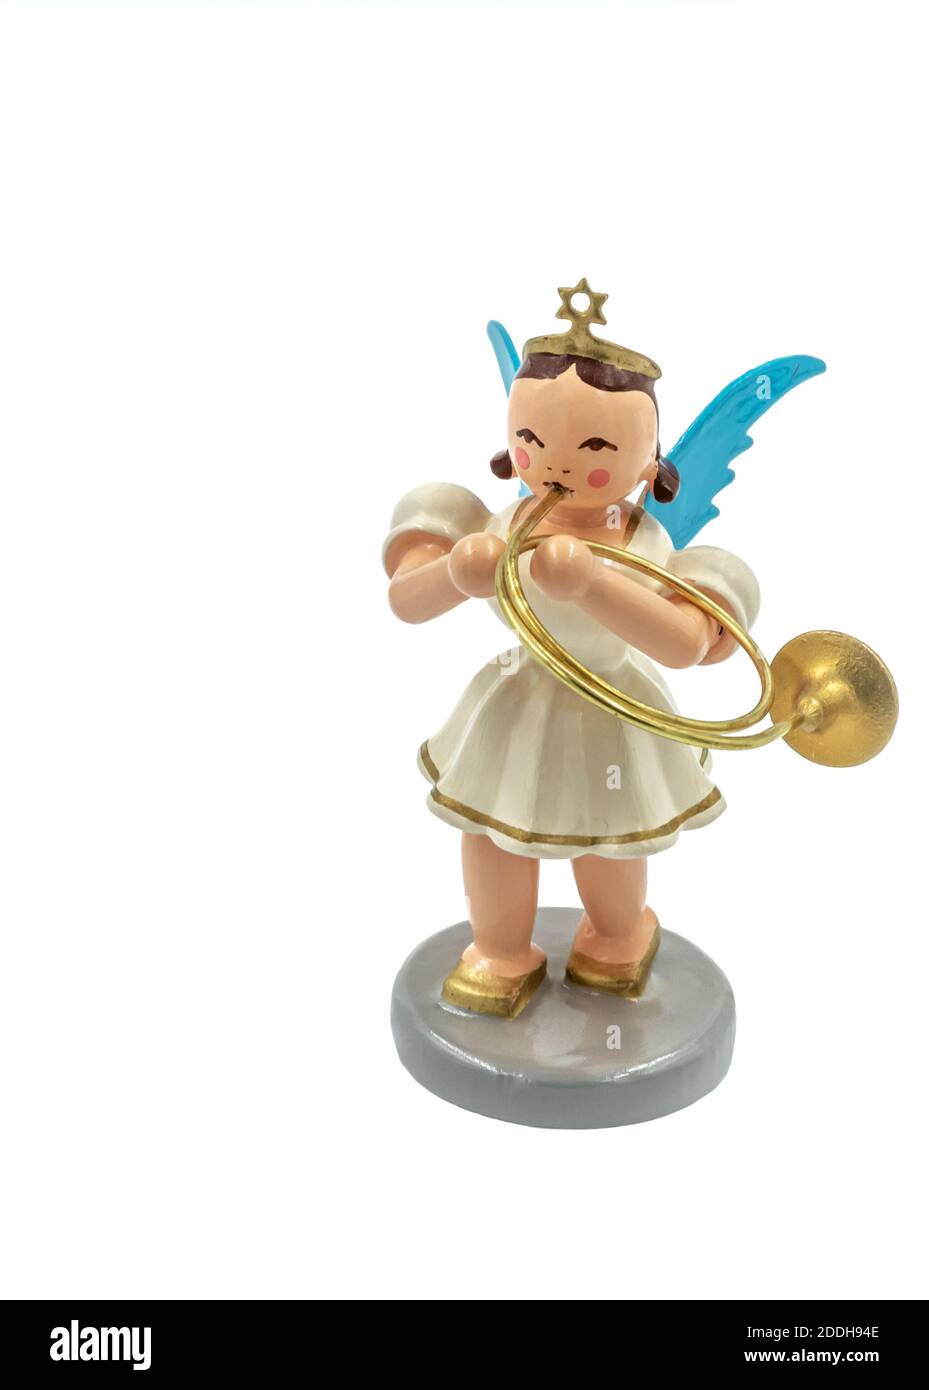 Closeup of a original handcarved wooden German Christmas Angel figurine cut out on a white background, playing a trumpet Stock Photo